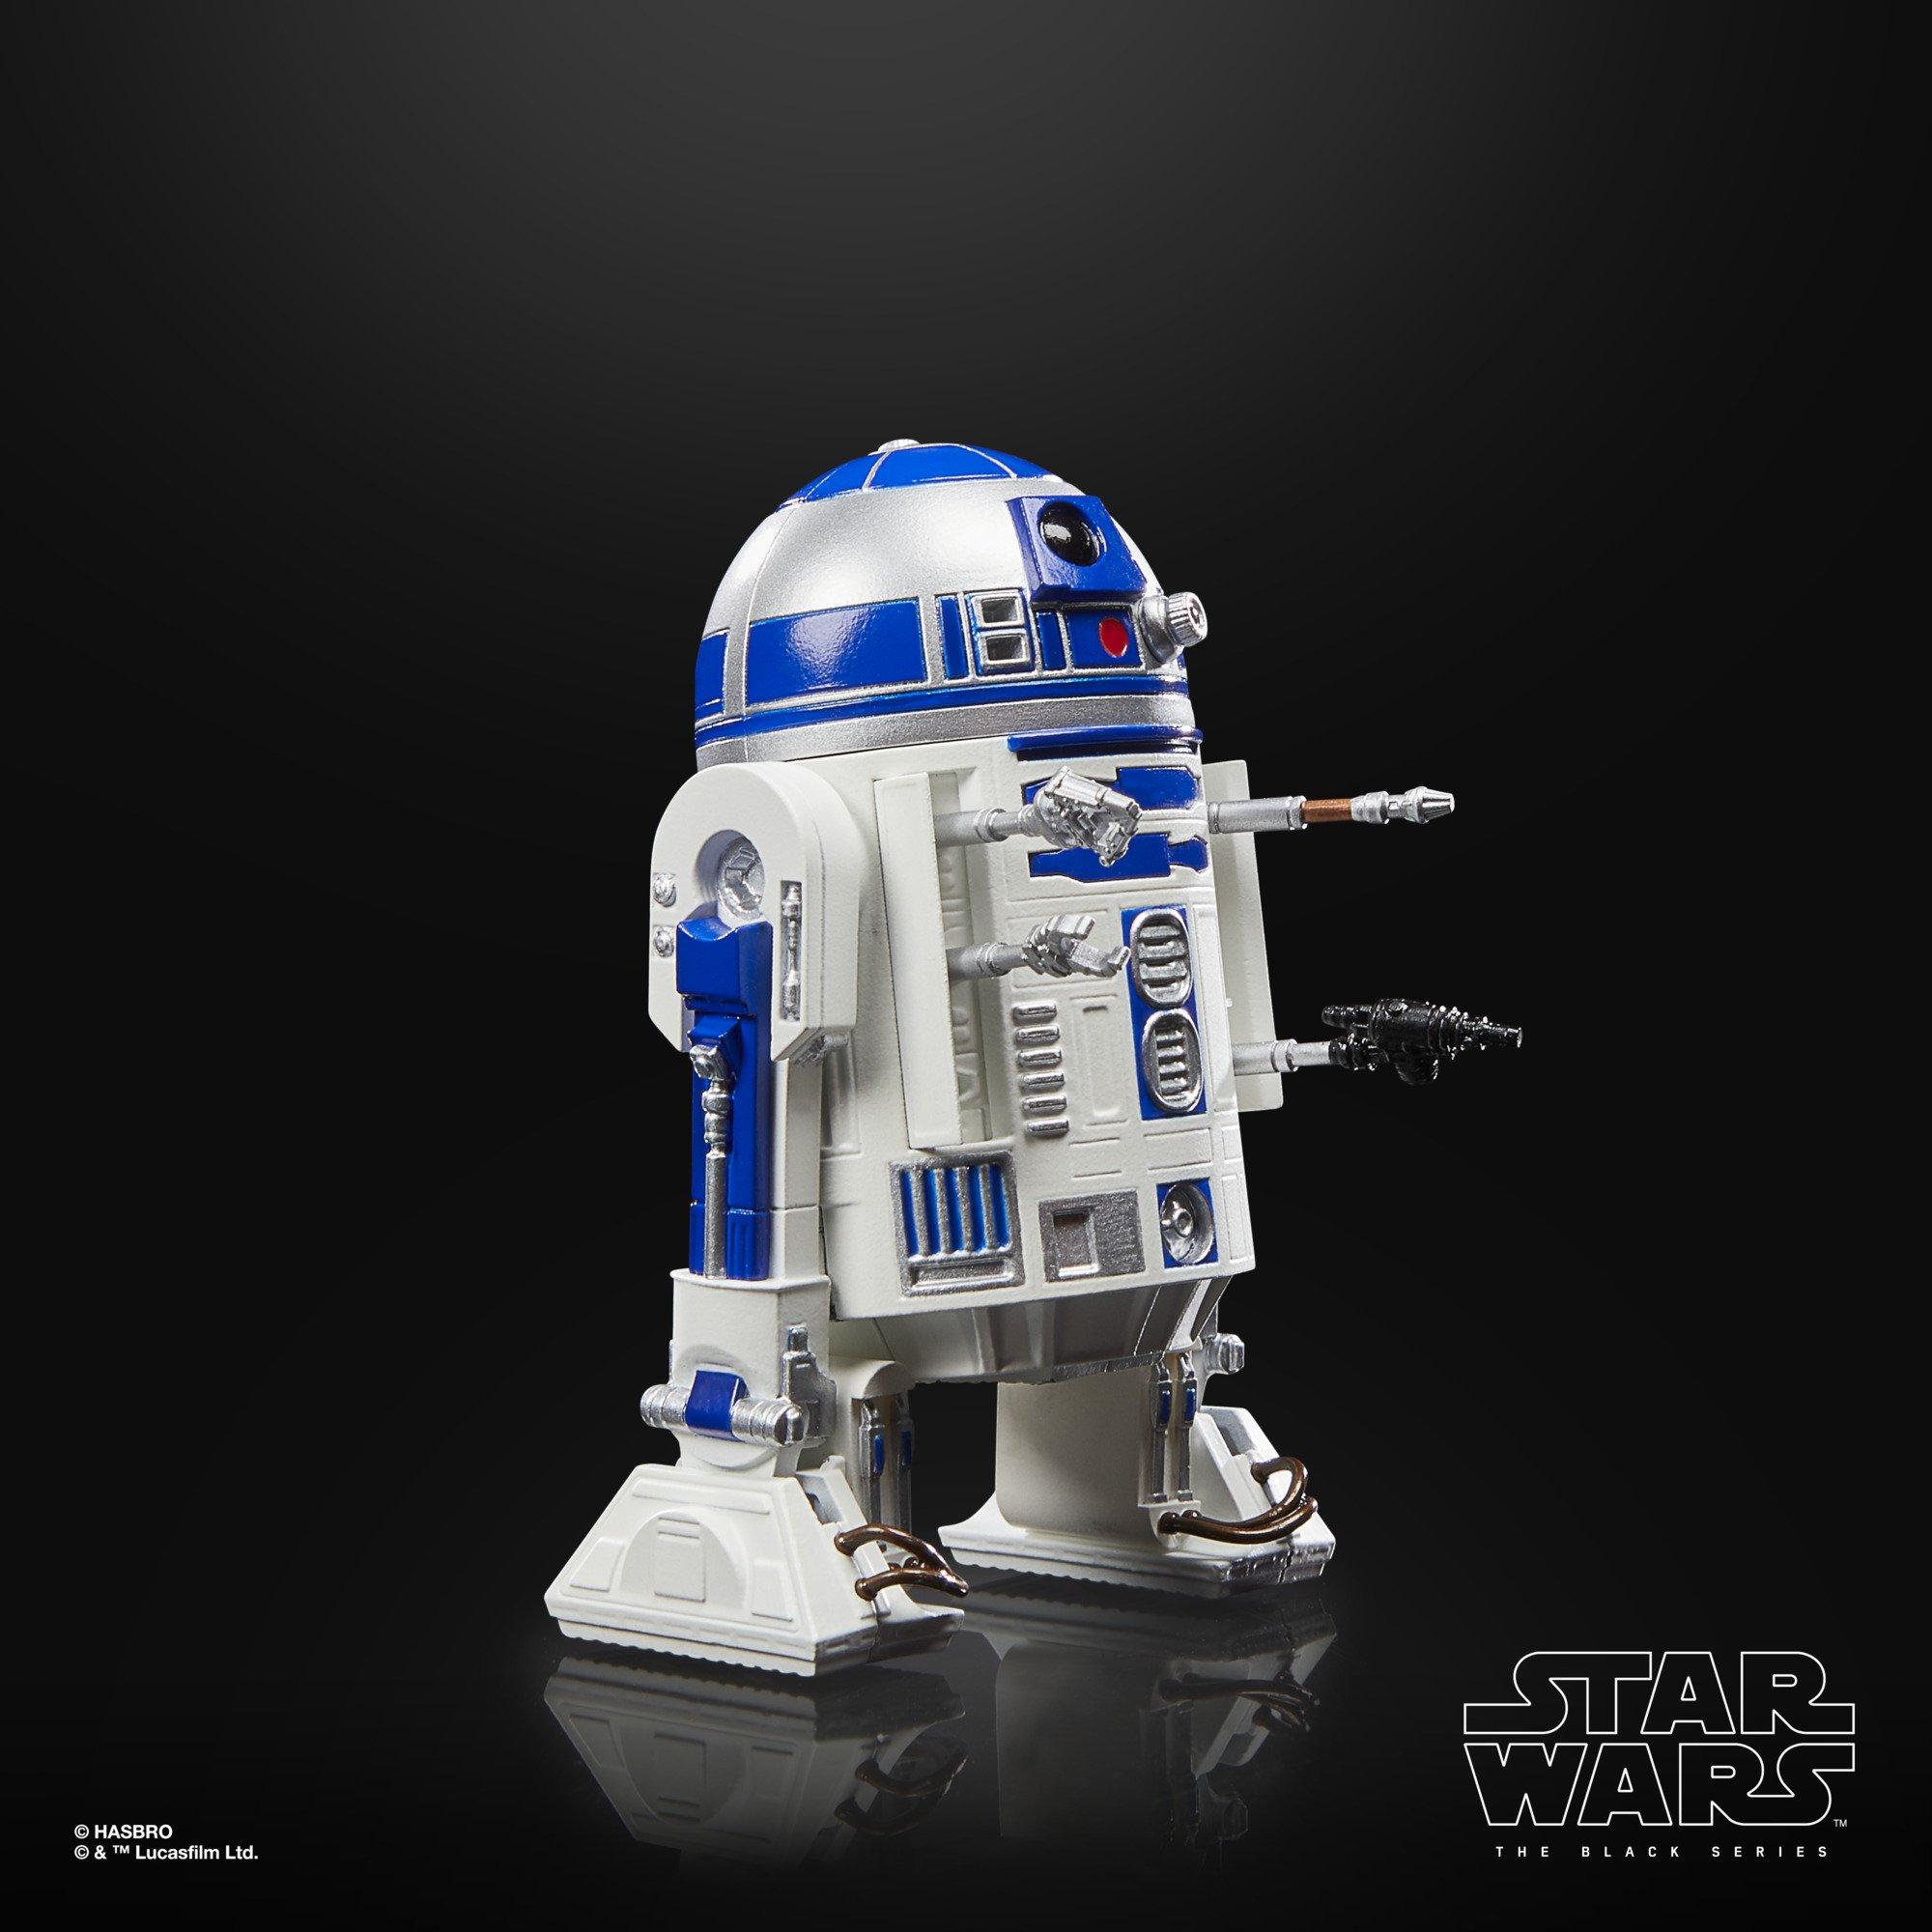 R2-D2 from Star Wars Series